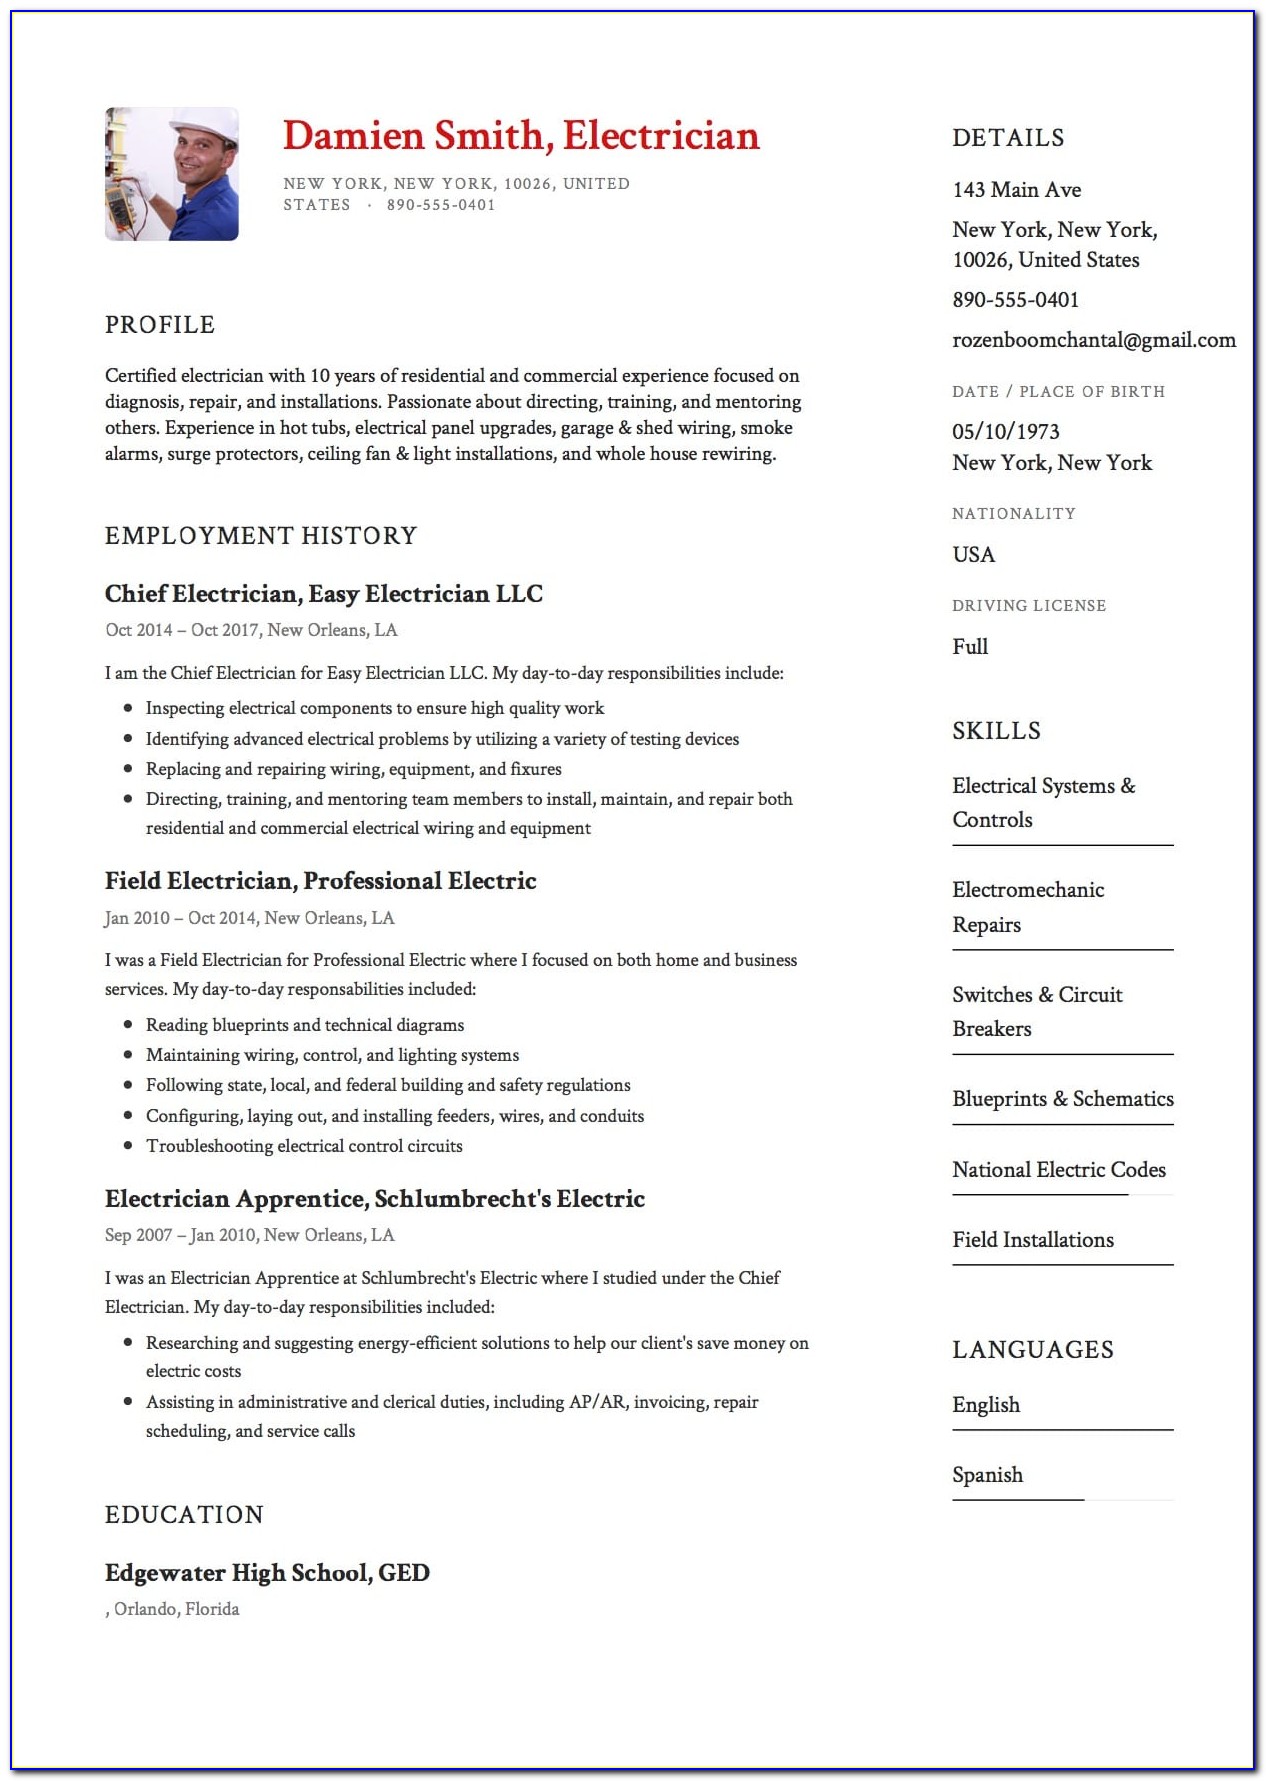 Resume Samples For Electrical Engineers Freshers